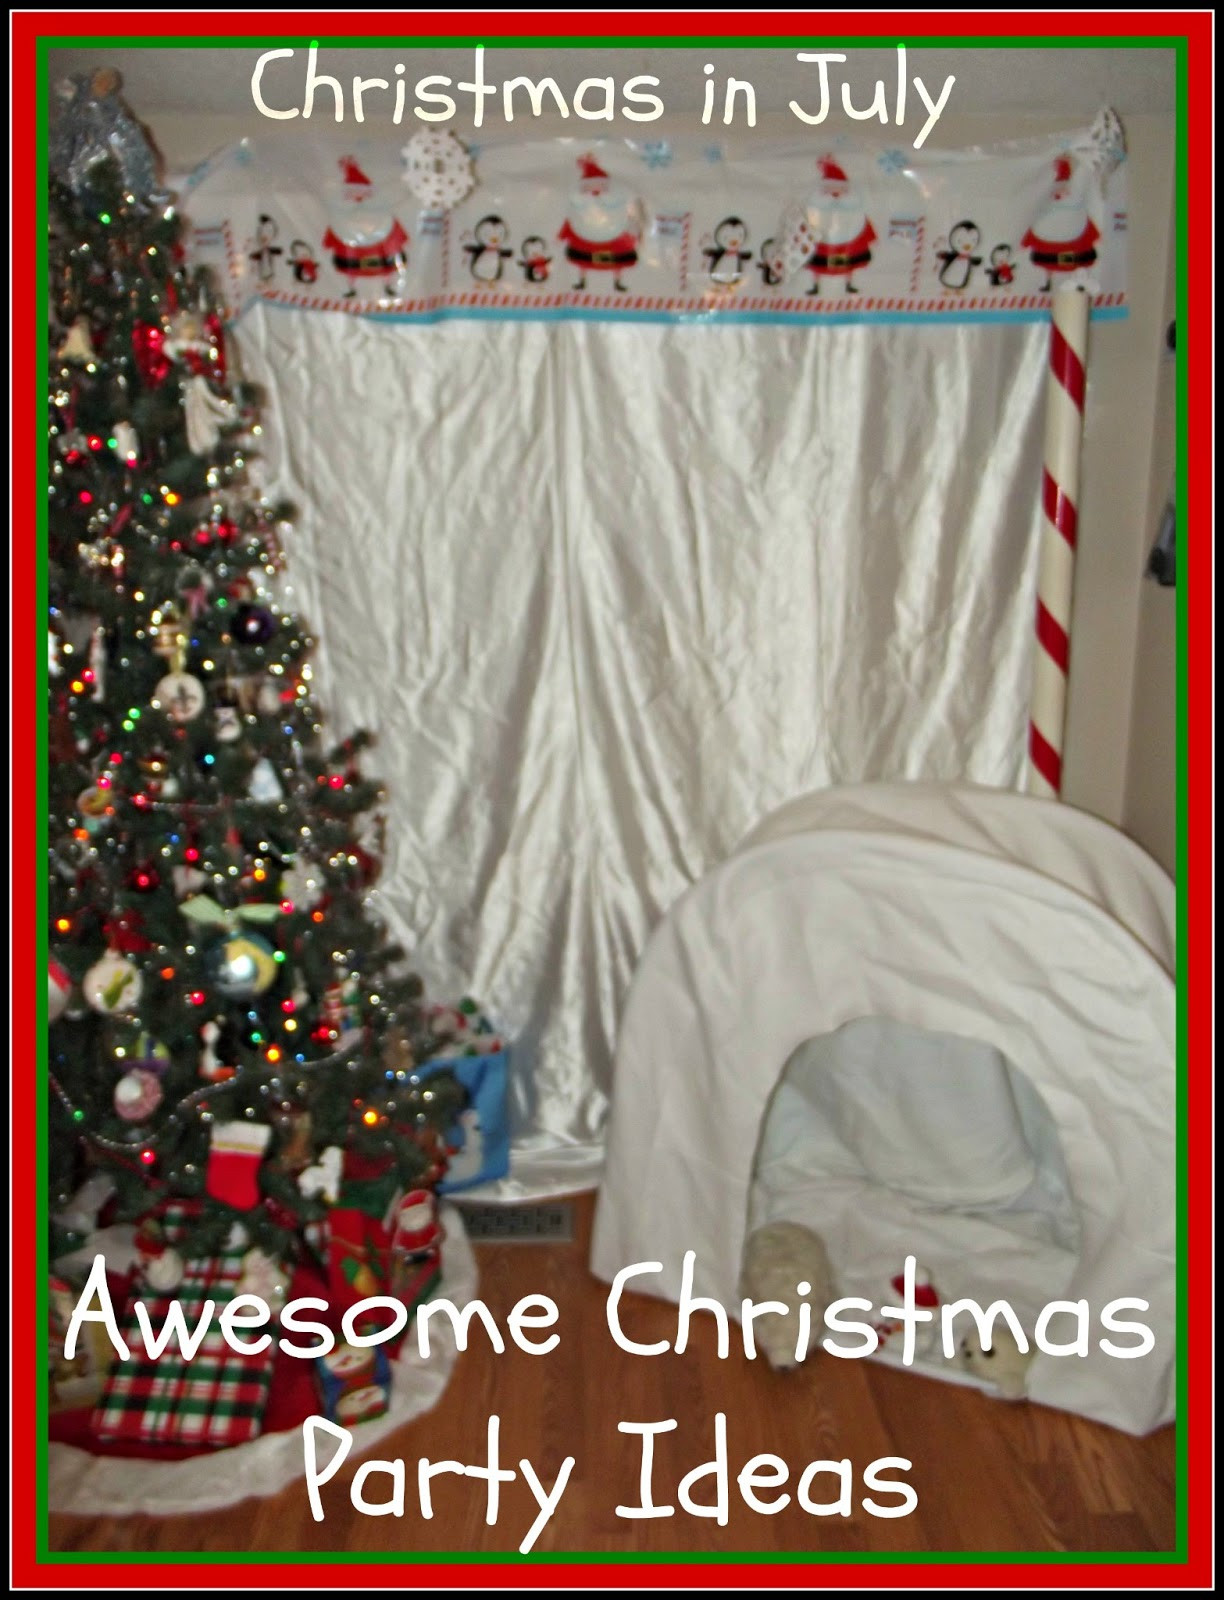 Awesome Christmas Party Ideas
 How to be Awesome at Everything Awesome Christmas Party Ideas